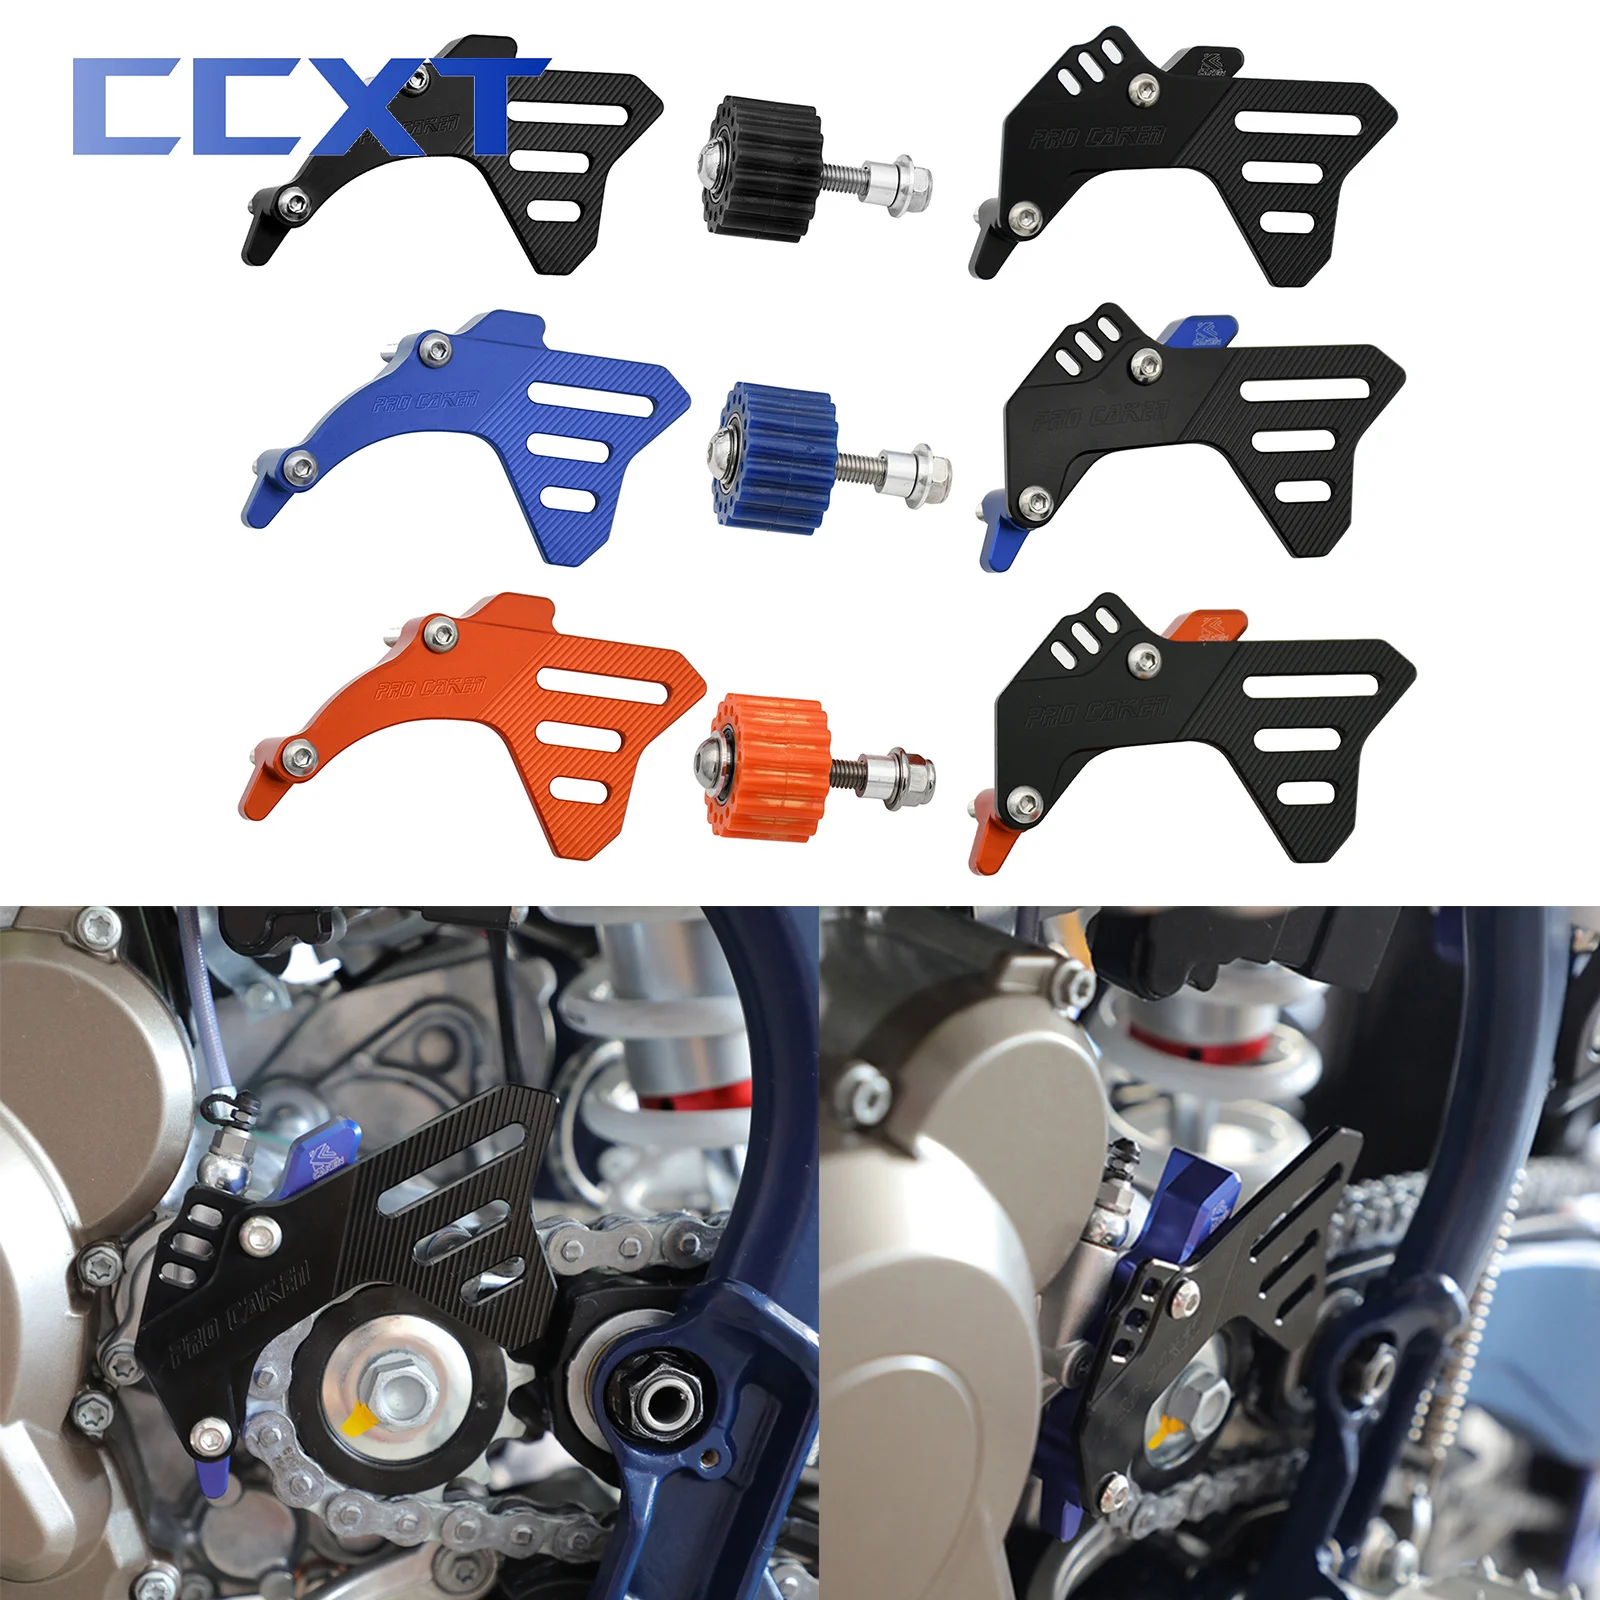 

Motorcycle Front Sprocket Guard Protector Chain Guard Cover For Husqvarna TC TX TE FC FX FE For KTM EXC SX SXF XCF XCW 250-350cc